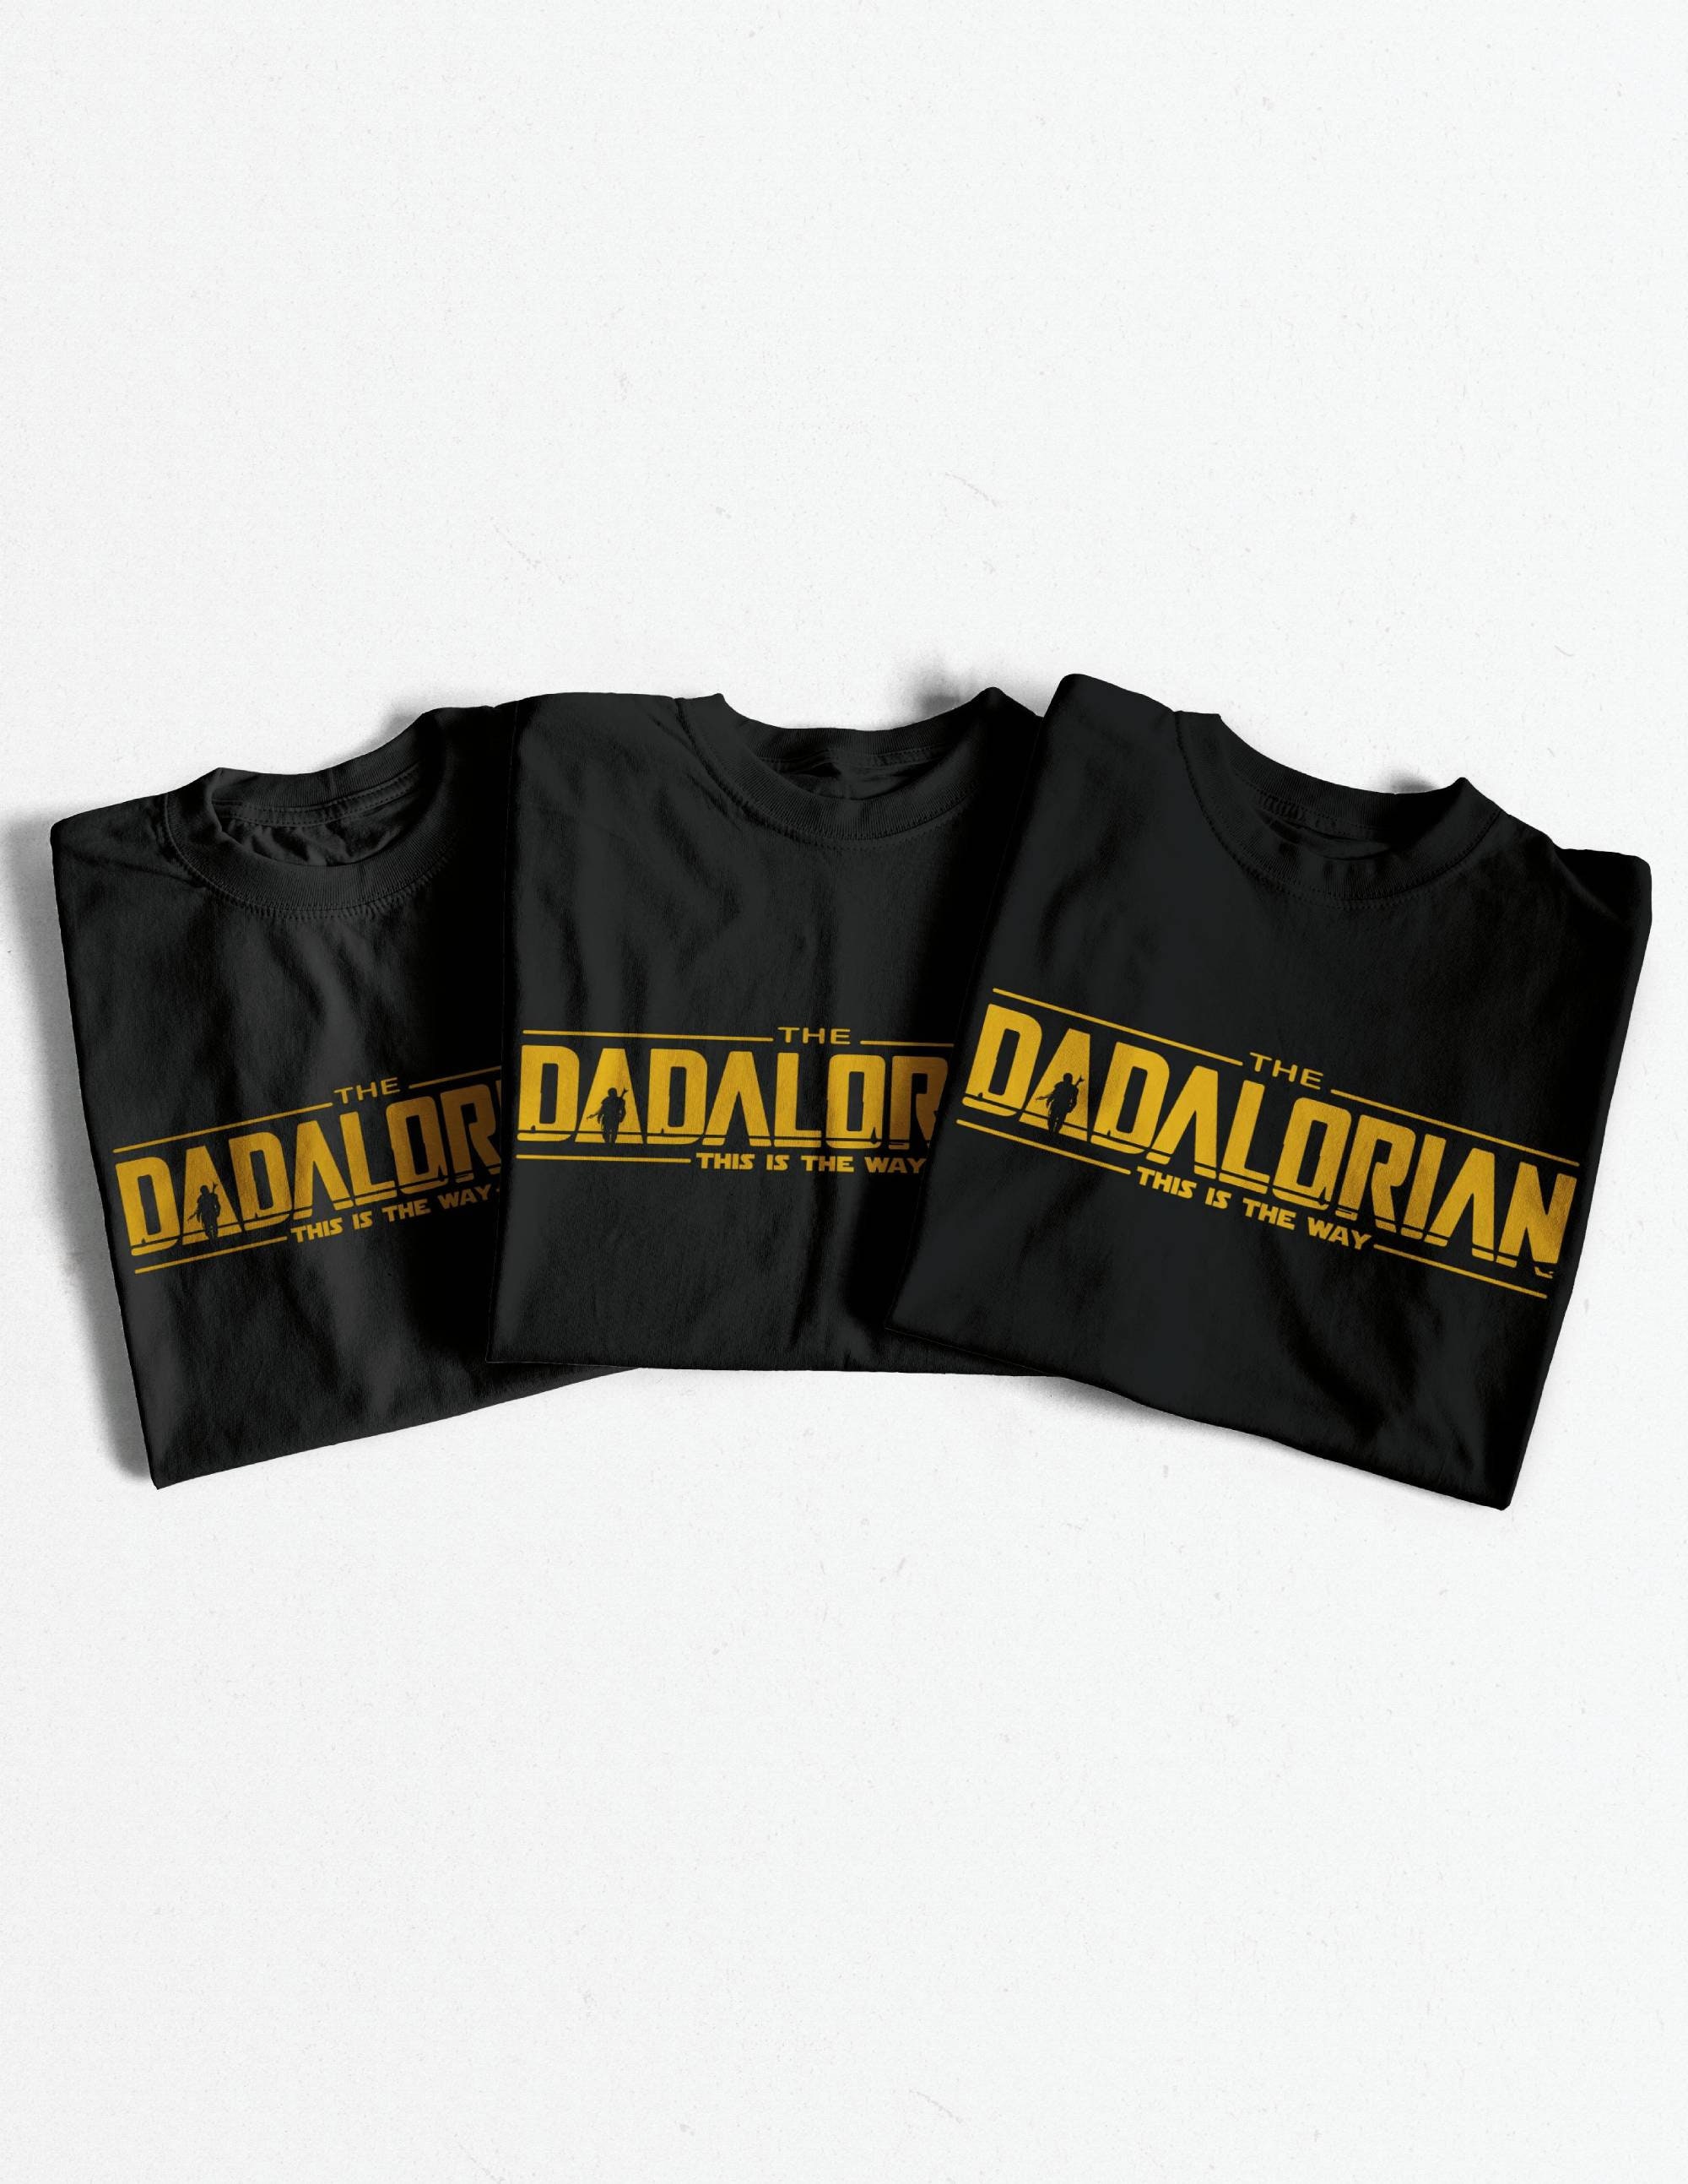 Discover The Dadalorian T-Shirt This Is The Way Men's Fathers Day Gift Tee Shirt Top